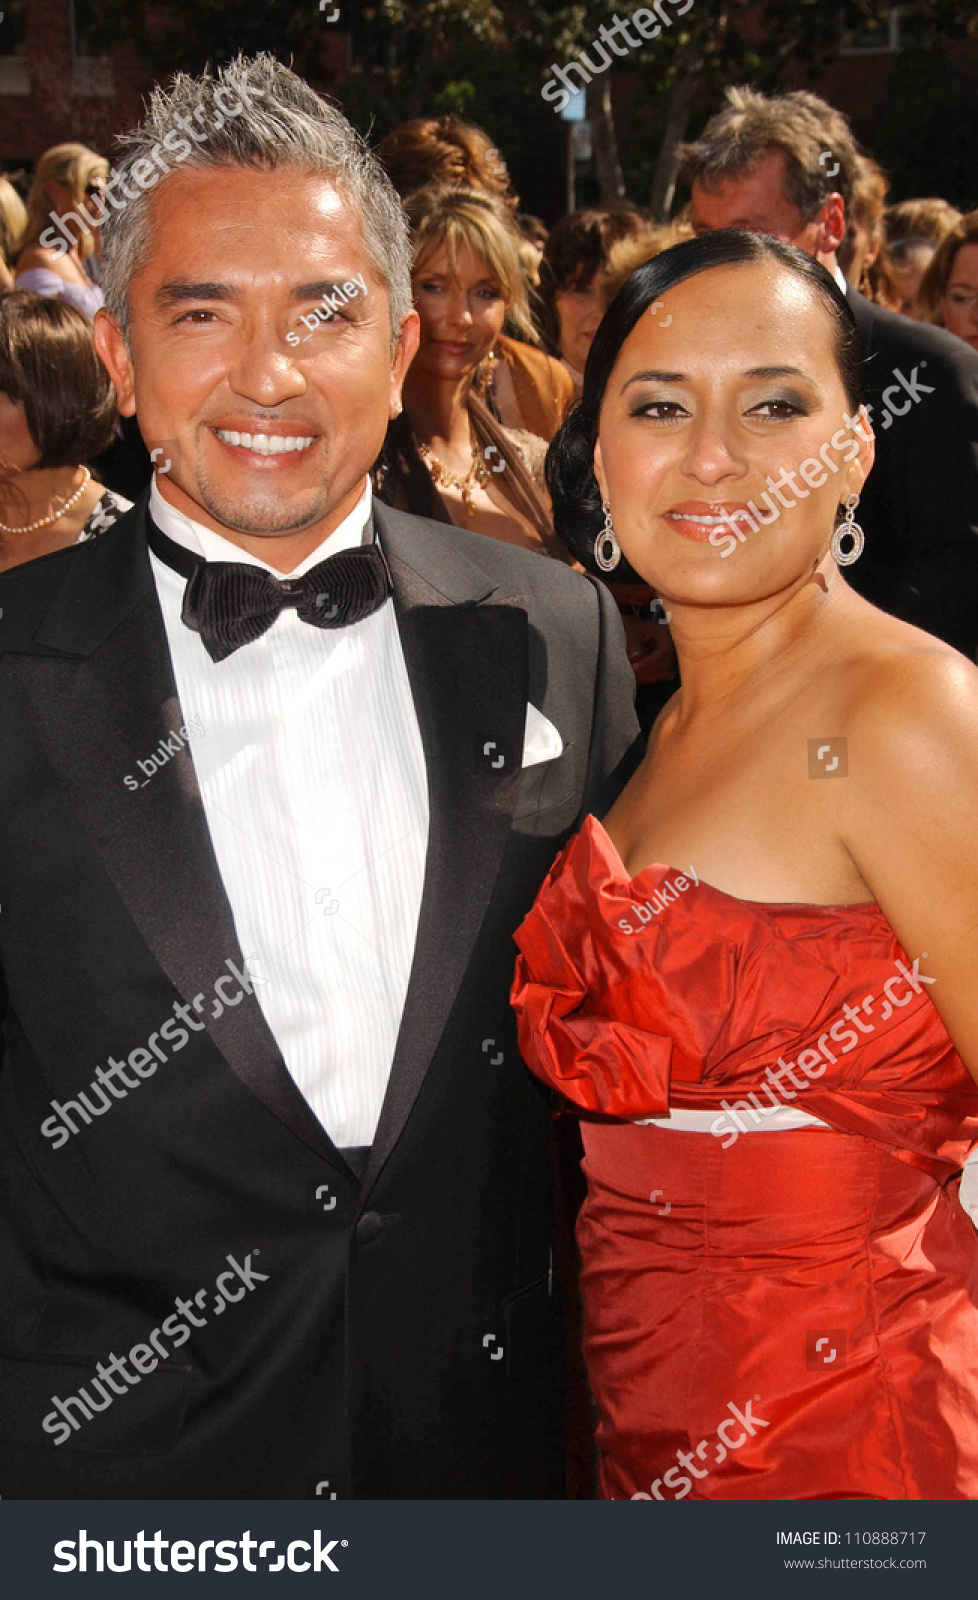 Married cesar millan to is who DL What